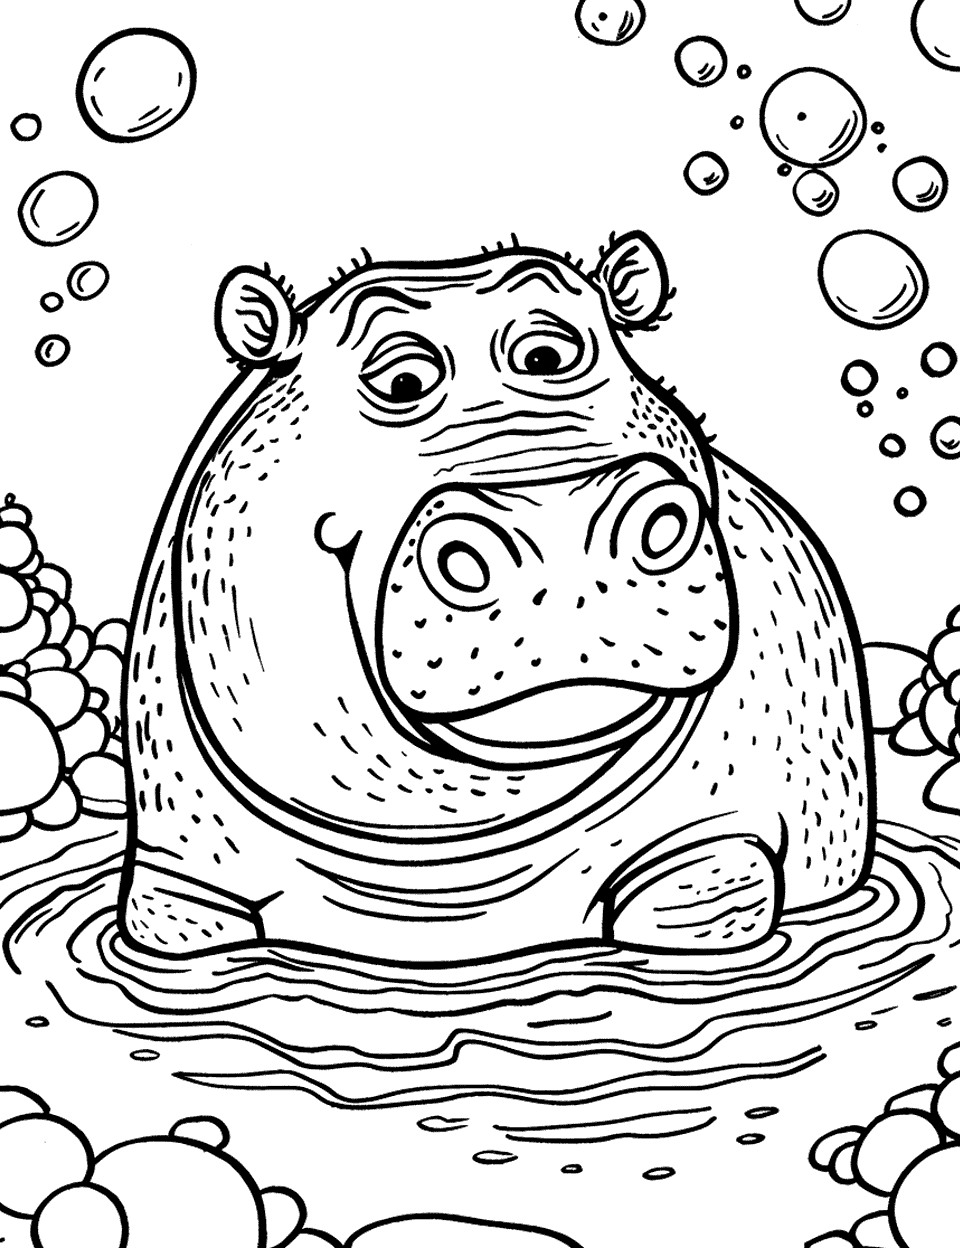 Hippo Bath Time Coloring Page - A happy hippo taking a bath in a river, surrounded by bubbles.